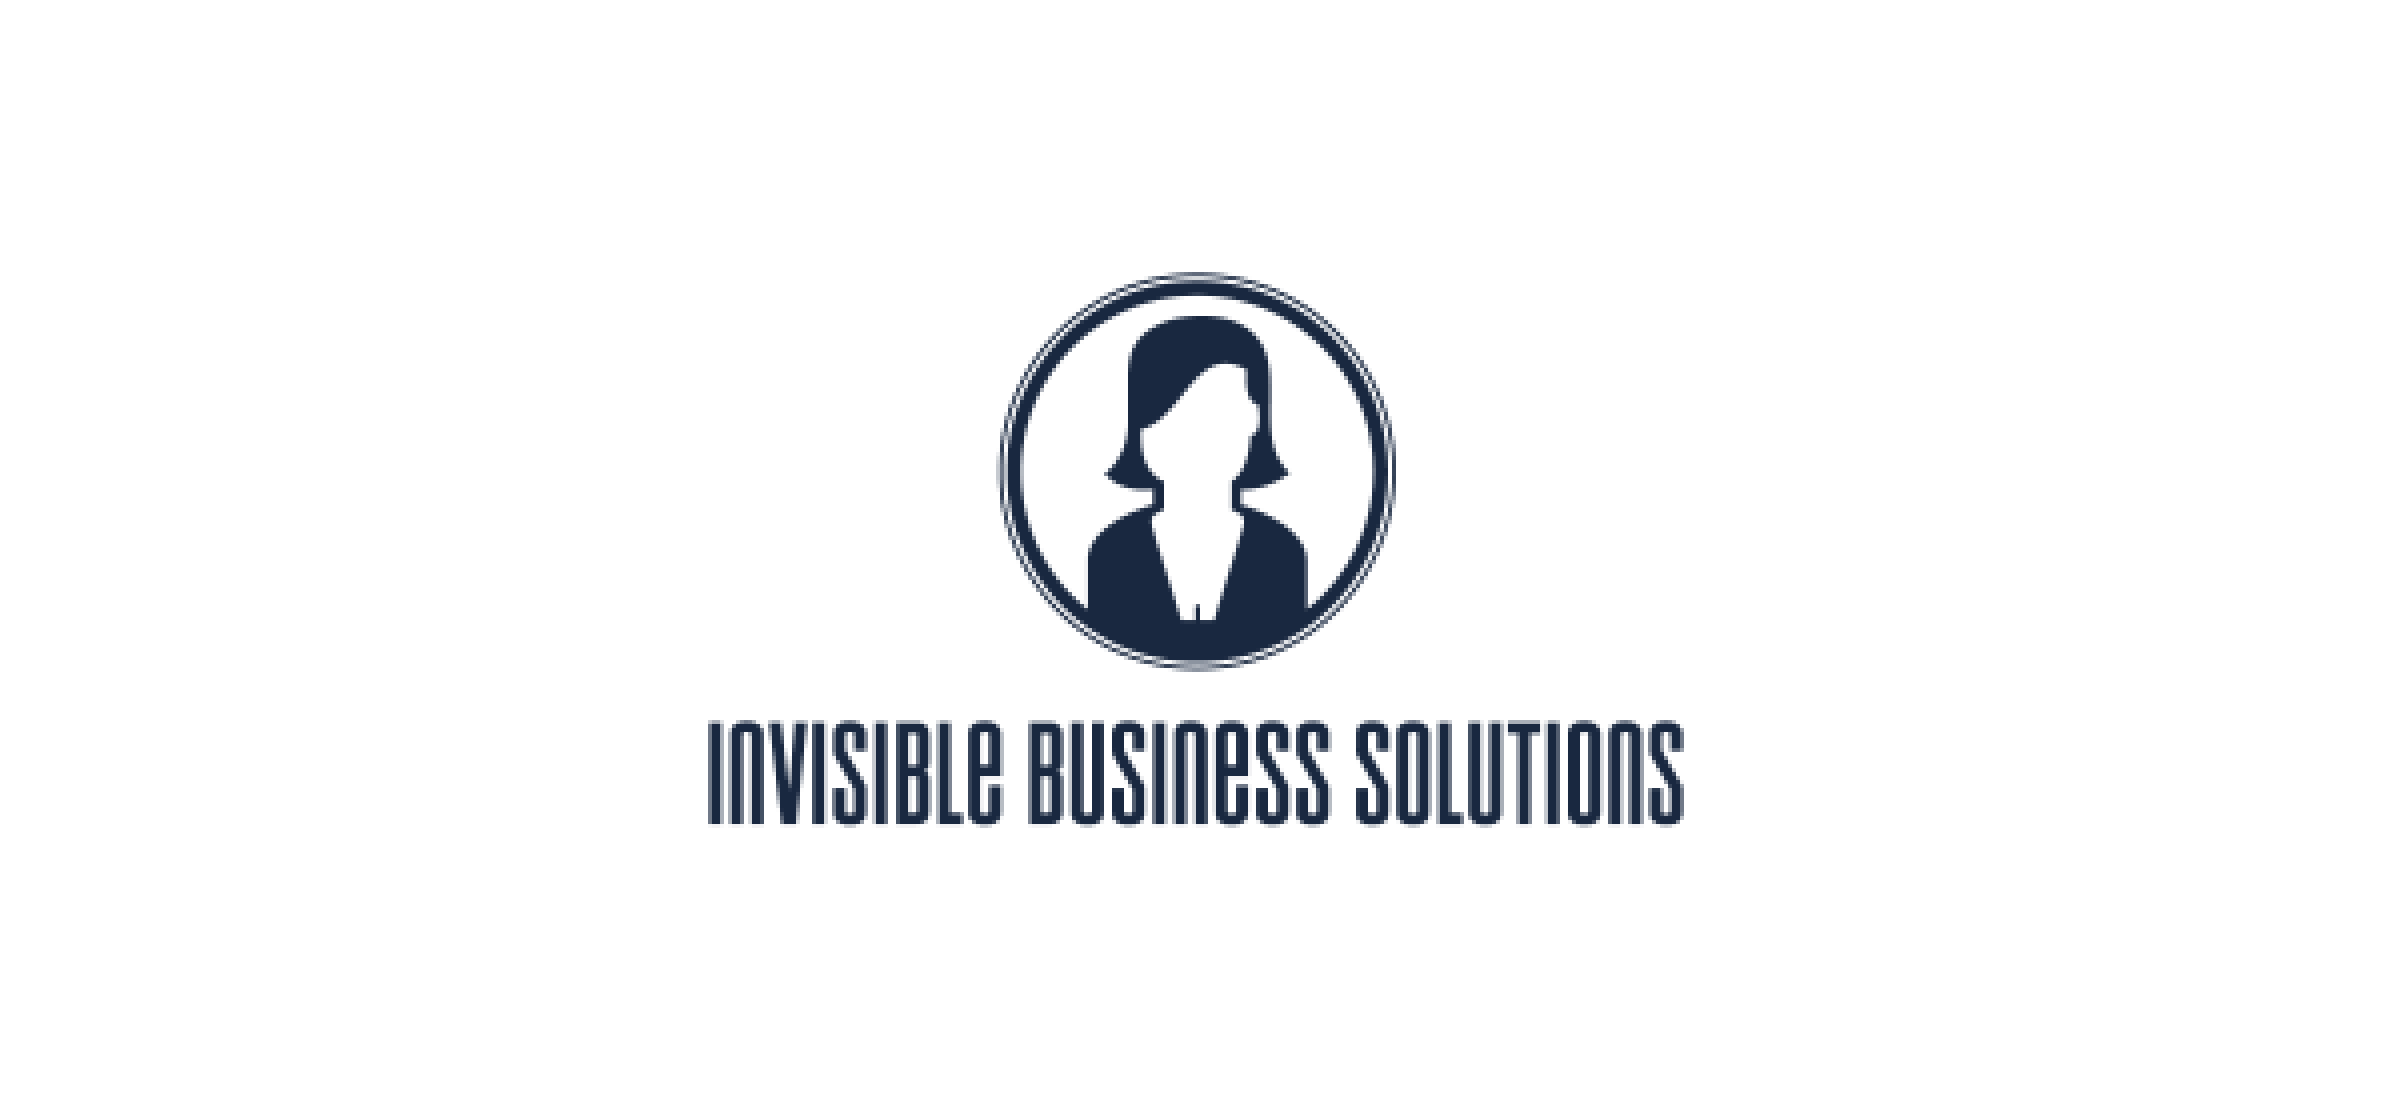 The Invisible Business Solutions logo